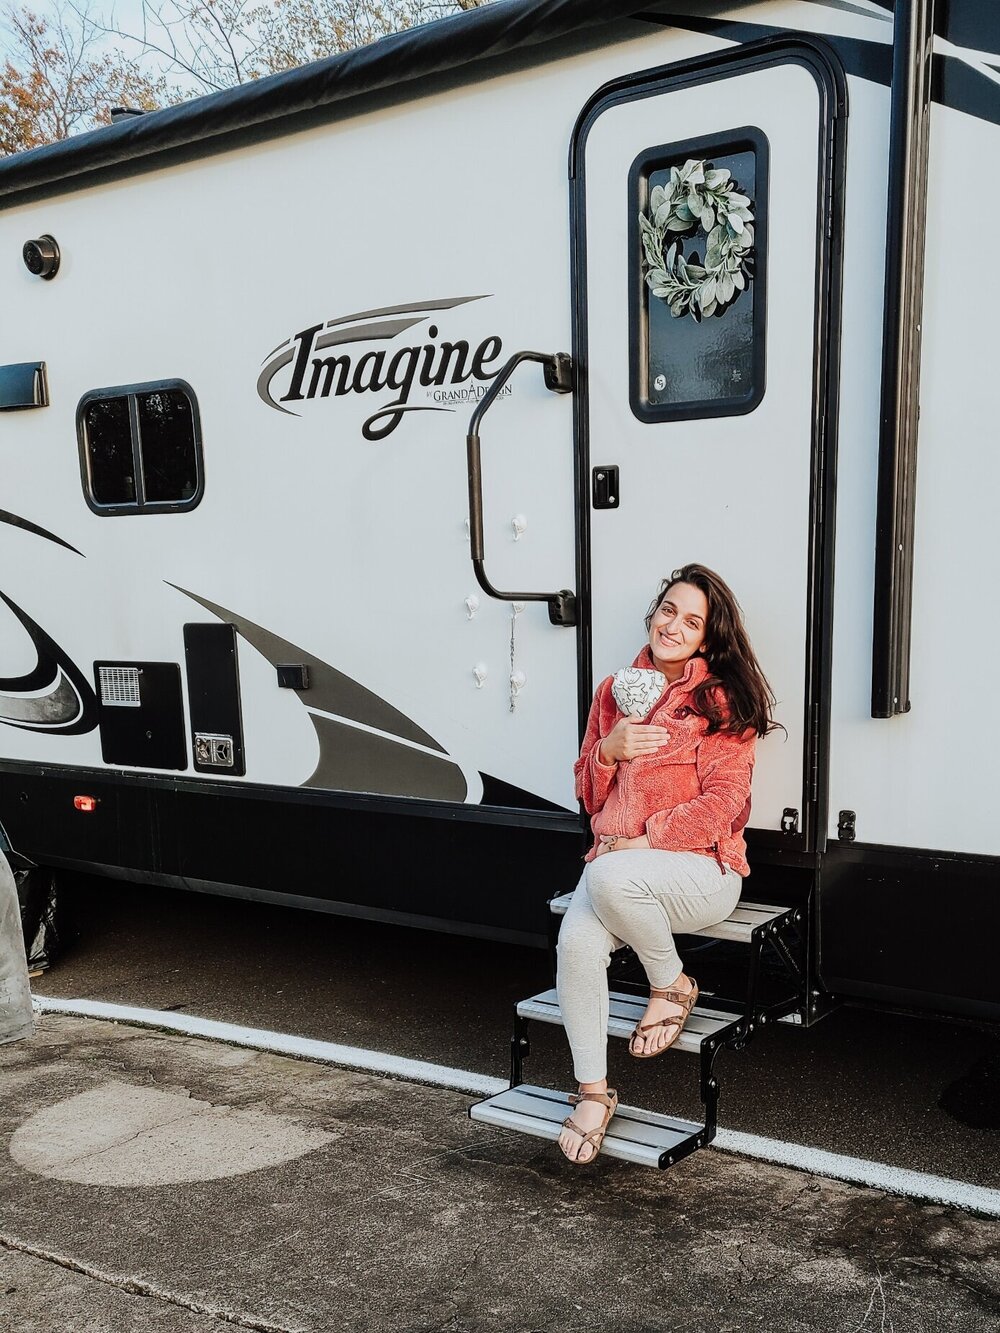 The Top 10 RV Accessories That Won't Break The Bank 